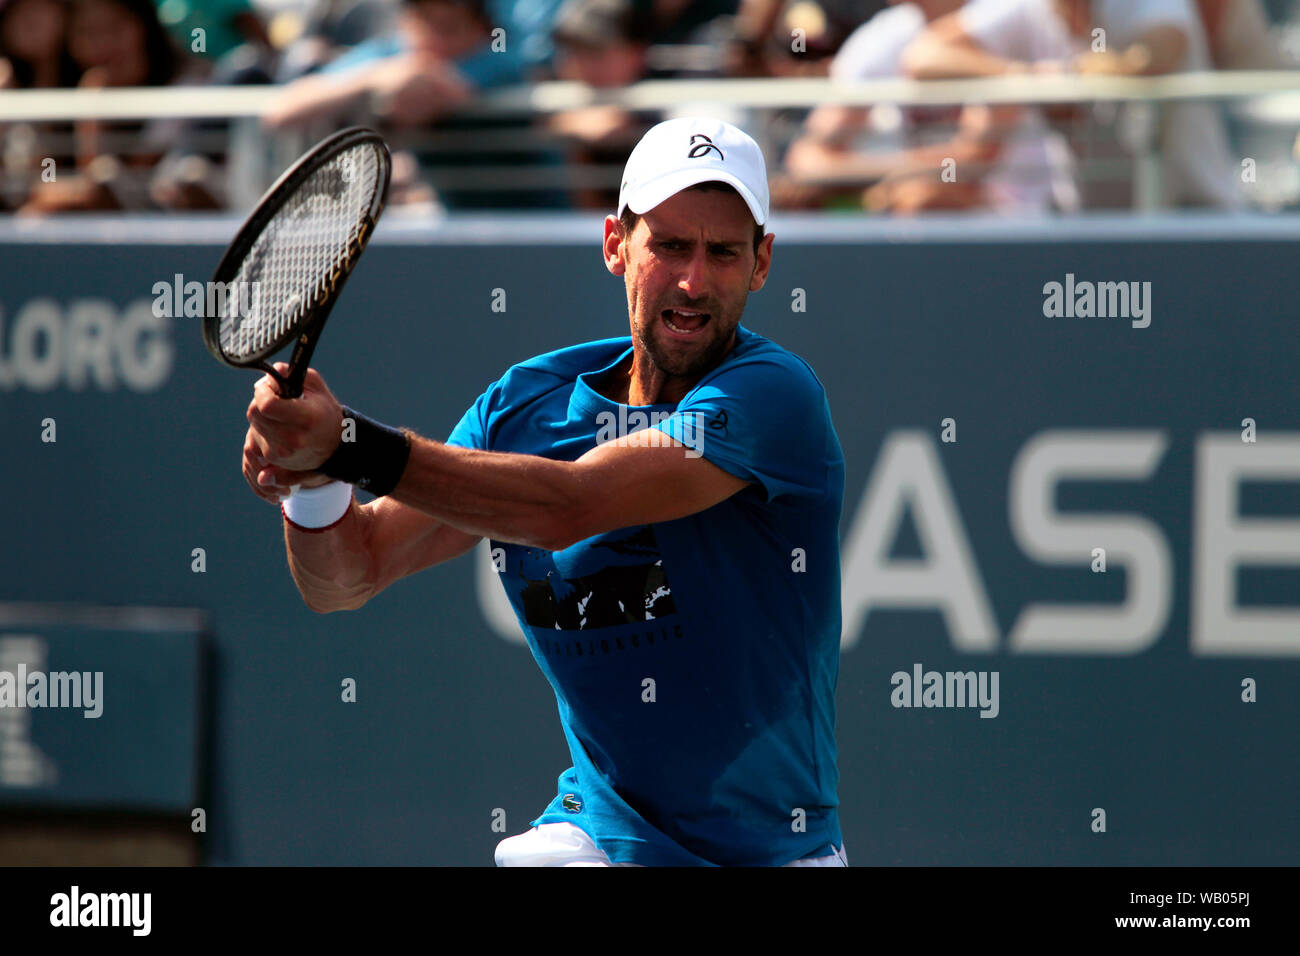 Flushing Meadows, New York, United States - 21 August 2019. Novak Djokovic of Serbia practicing at the National Tennis Center in Flushing Meadows, New York in preparation for the US Open which begins next Monday. Credit: Adam Stoltman/Alamy Live News Stock Photo